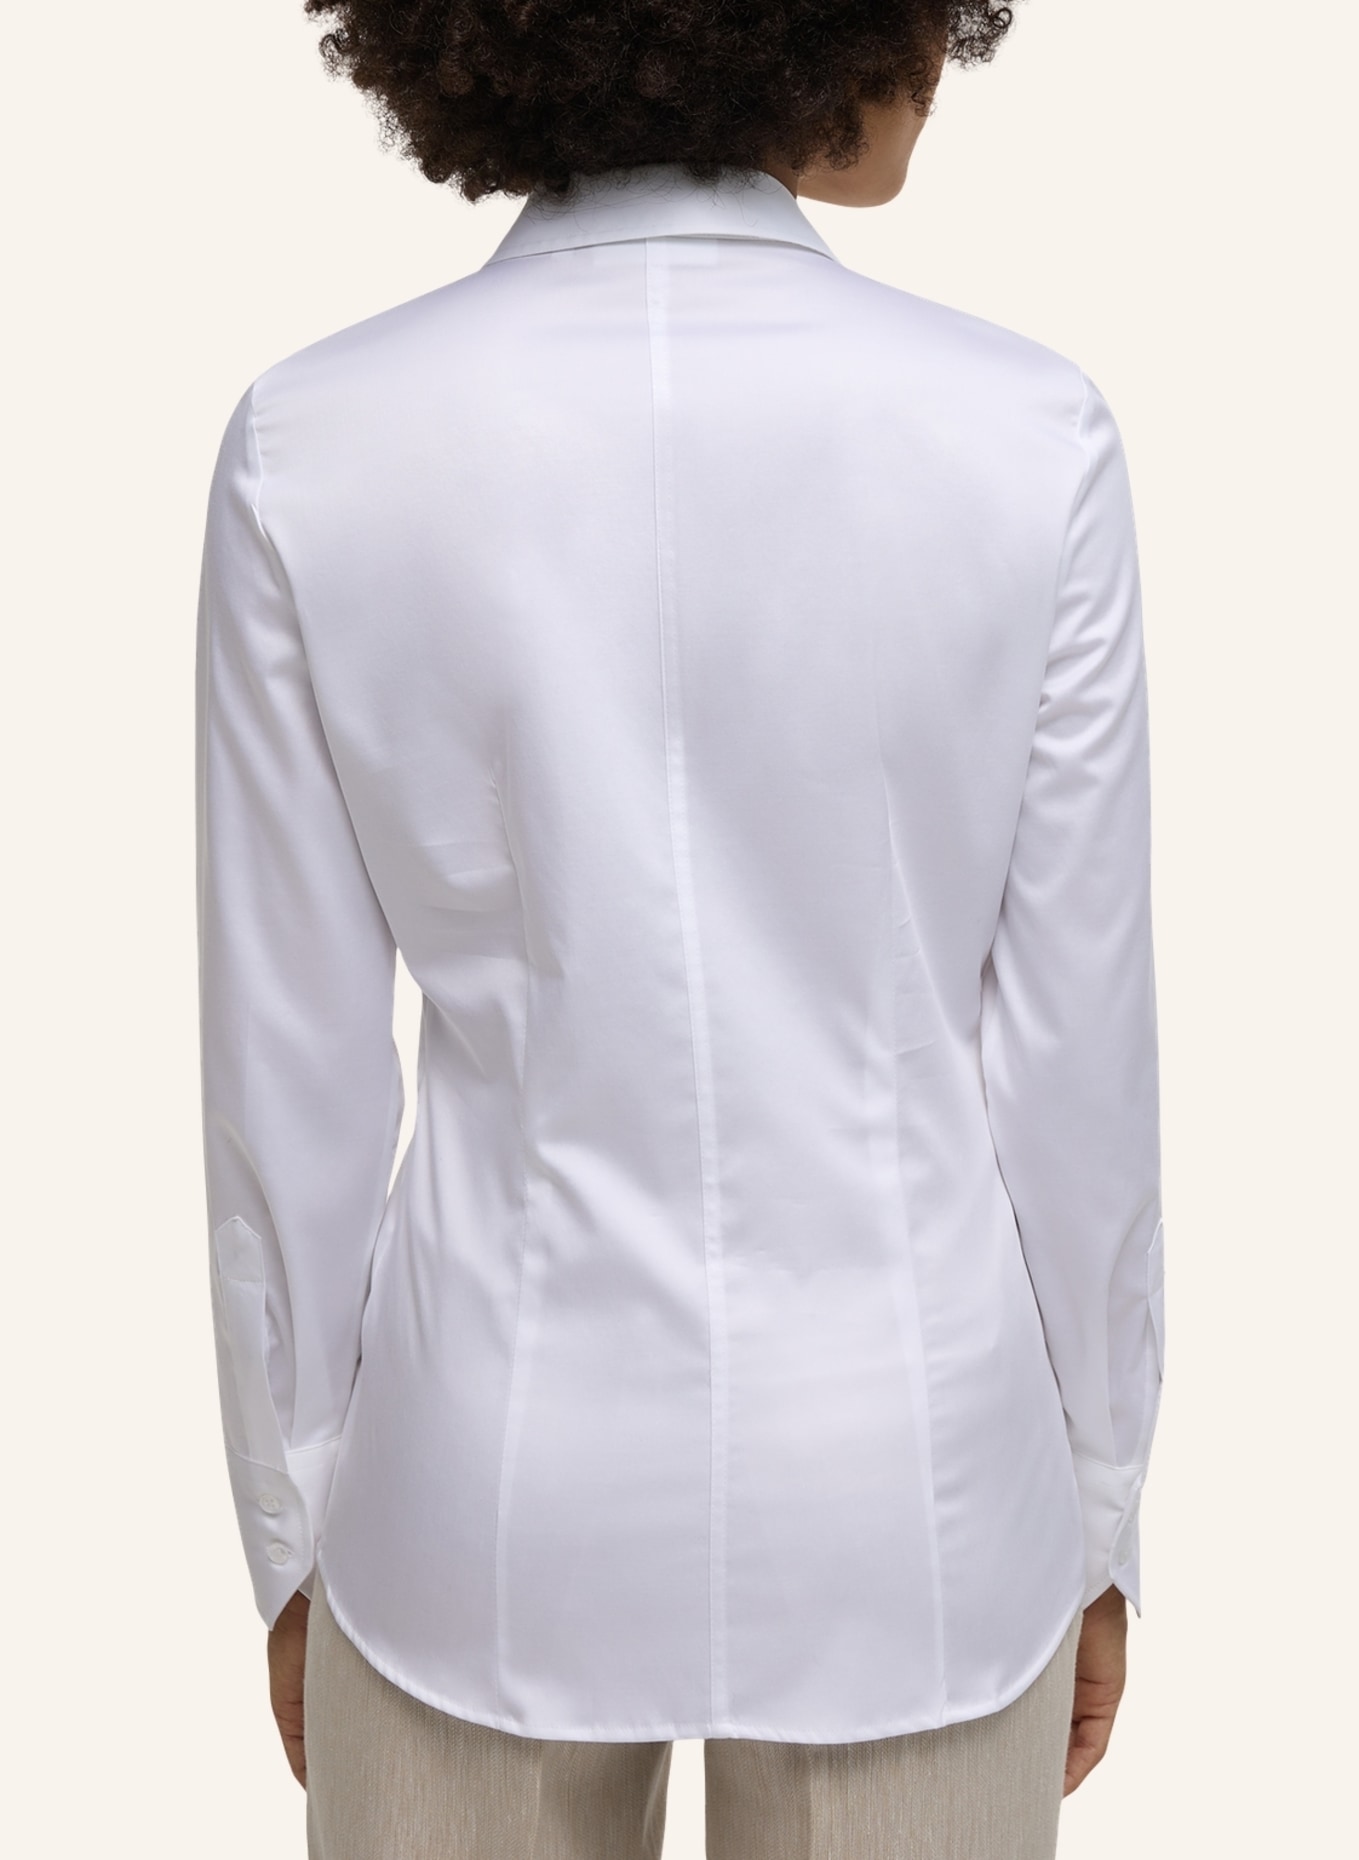 ETERNA Bluse FITTED weiss in